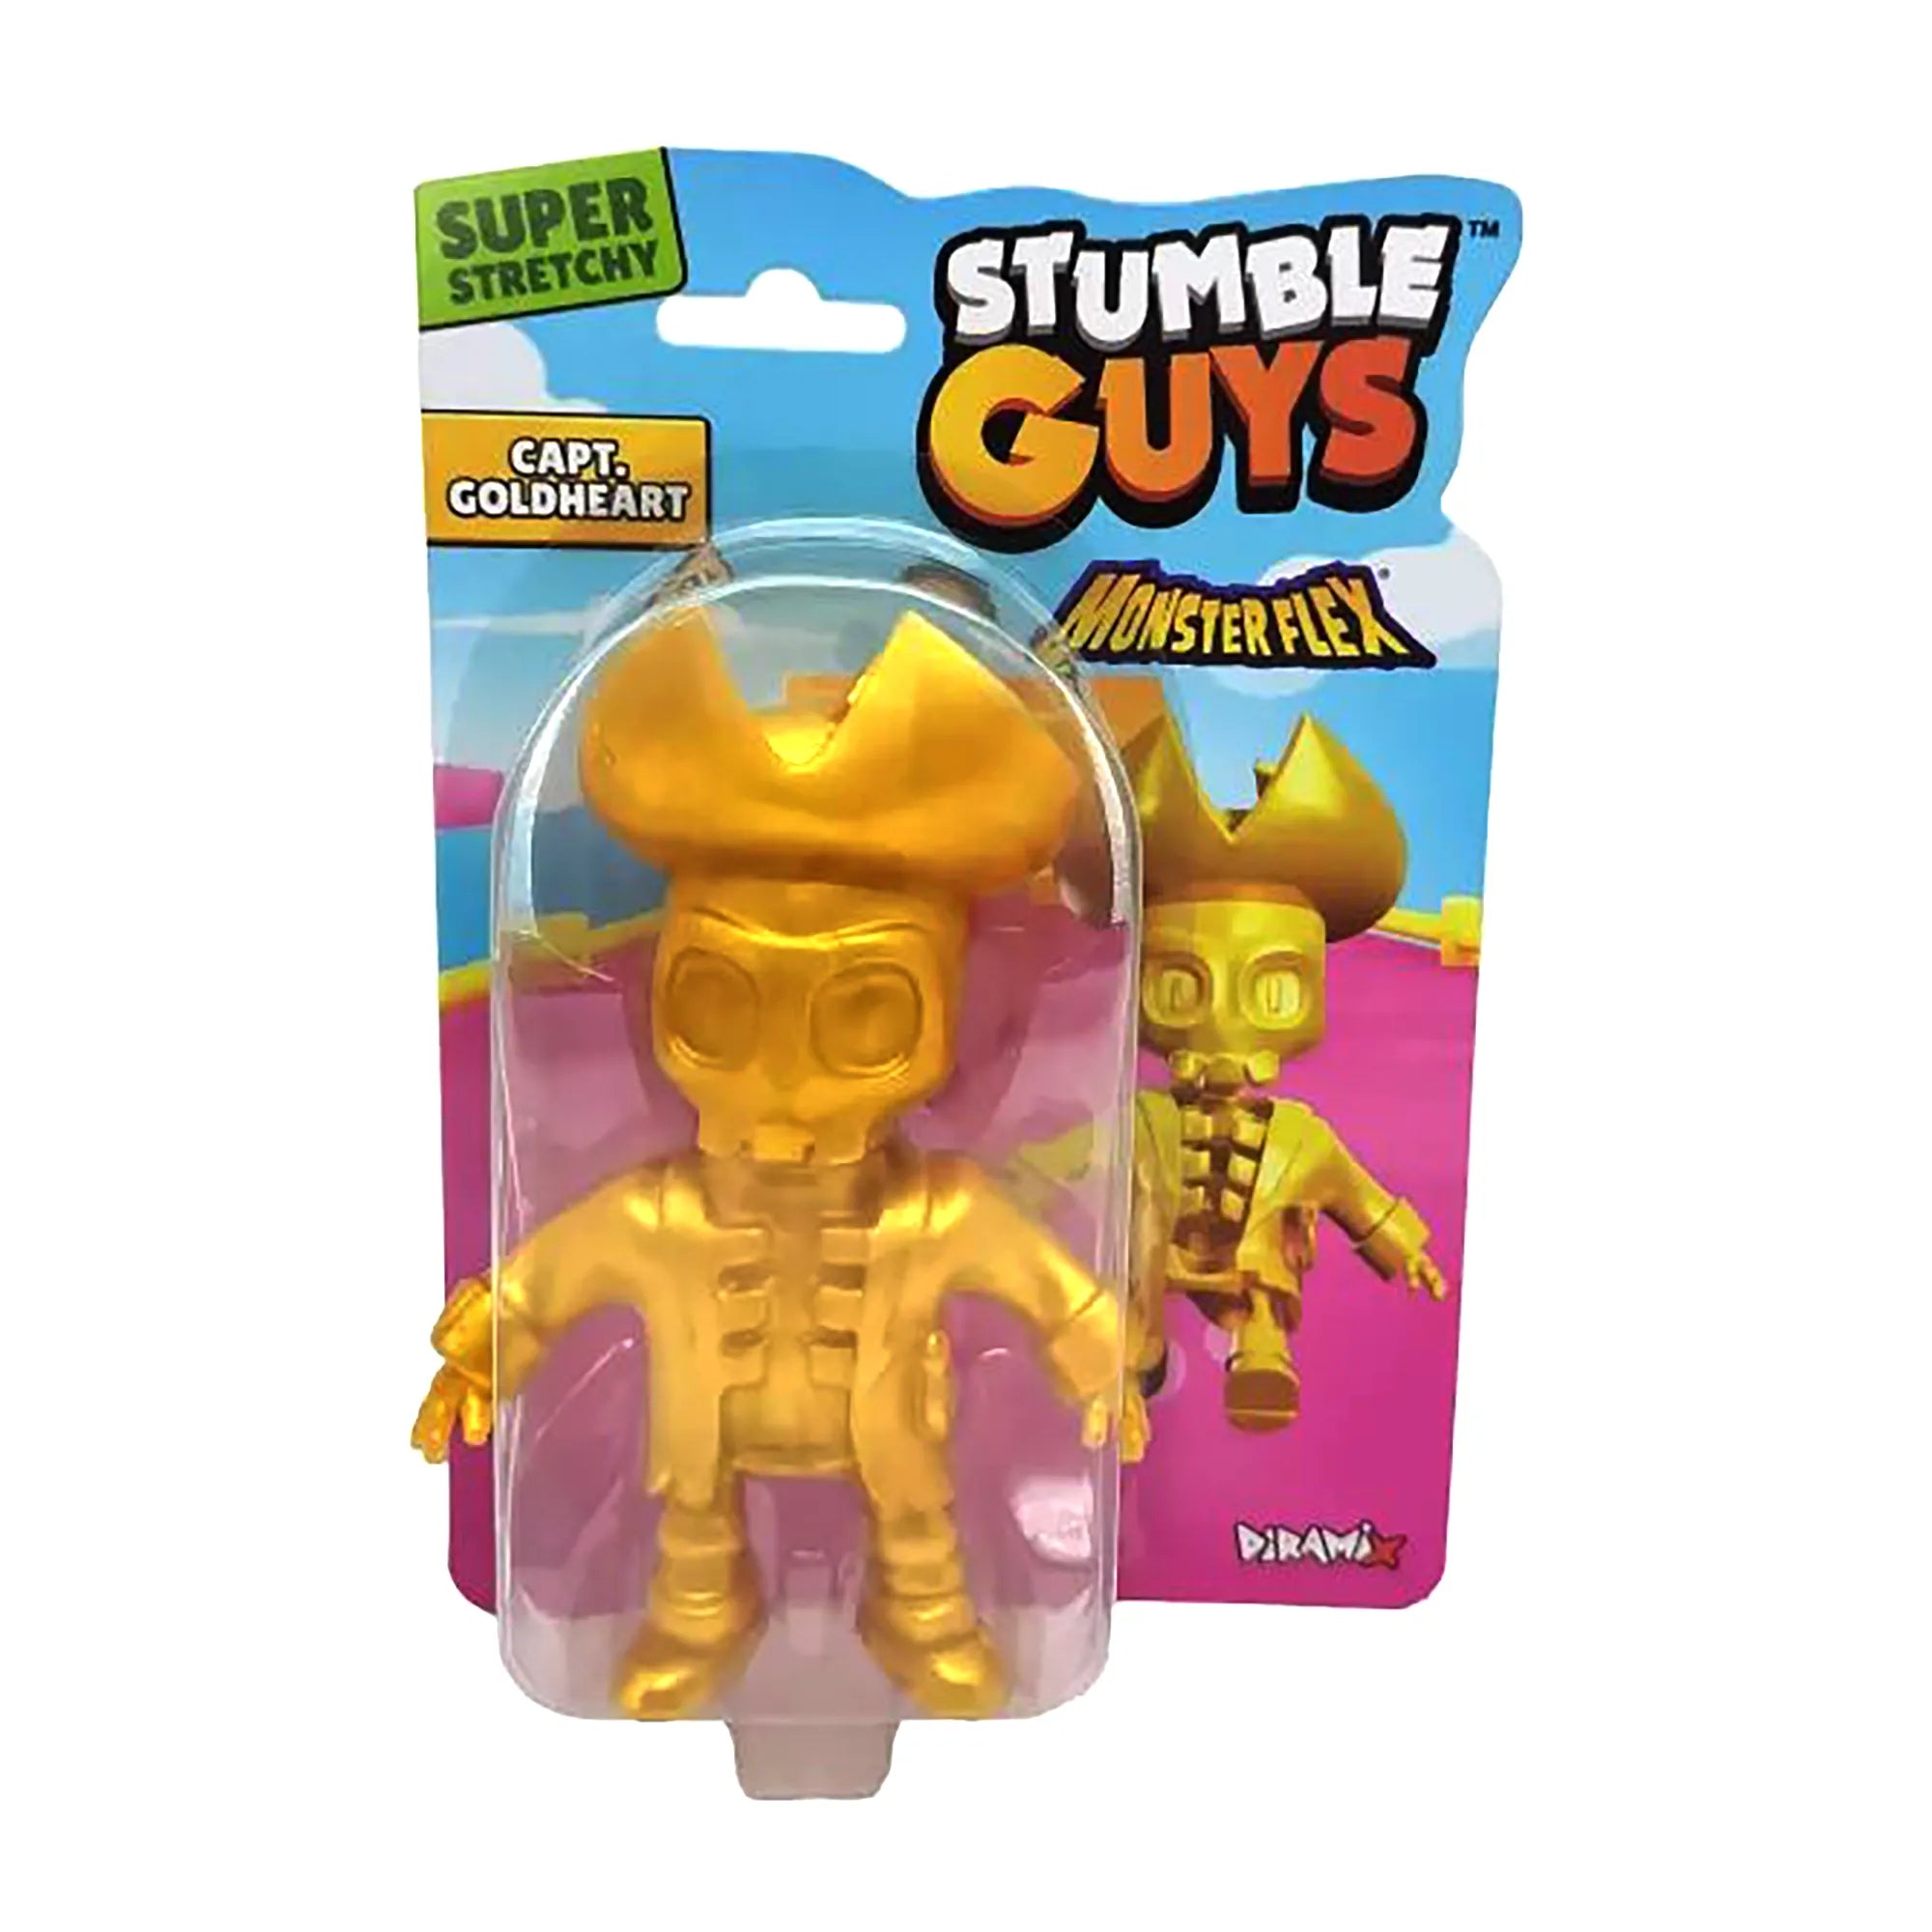 Stumble Guys Monster Flex - Capt. Goldheart - Special Chrome Collectible - Ages 6-Adult - Brown's Hobby & Game